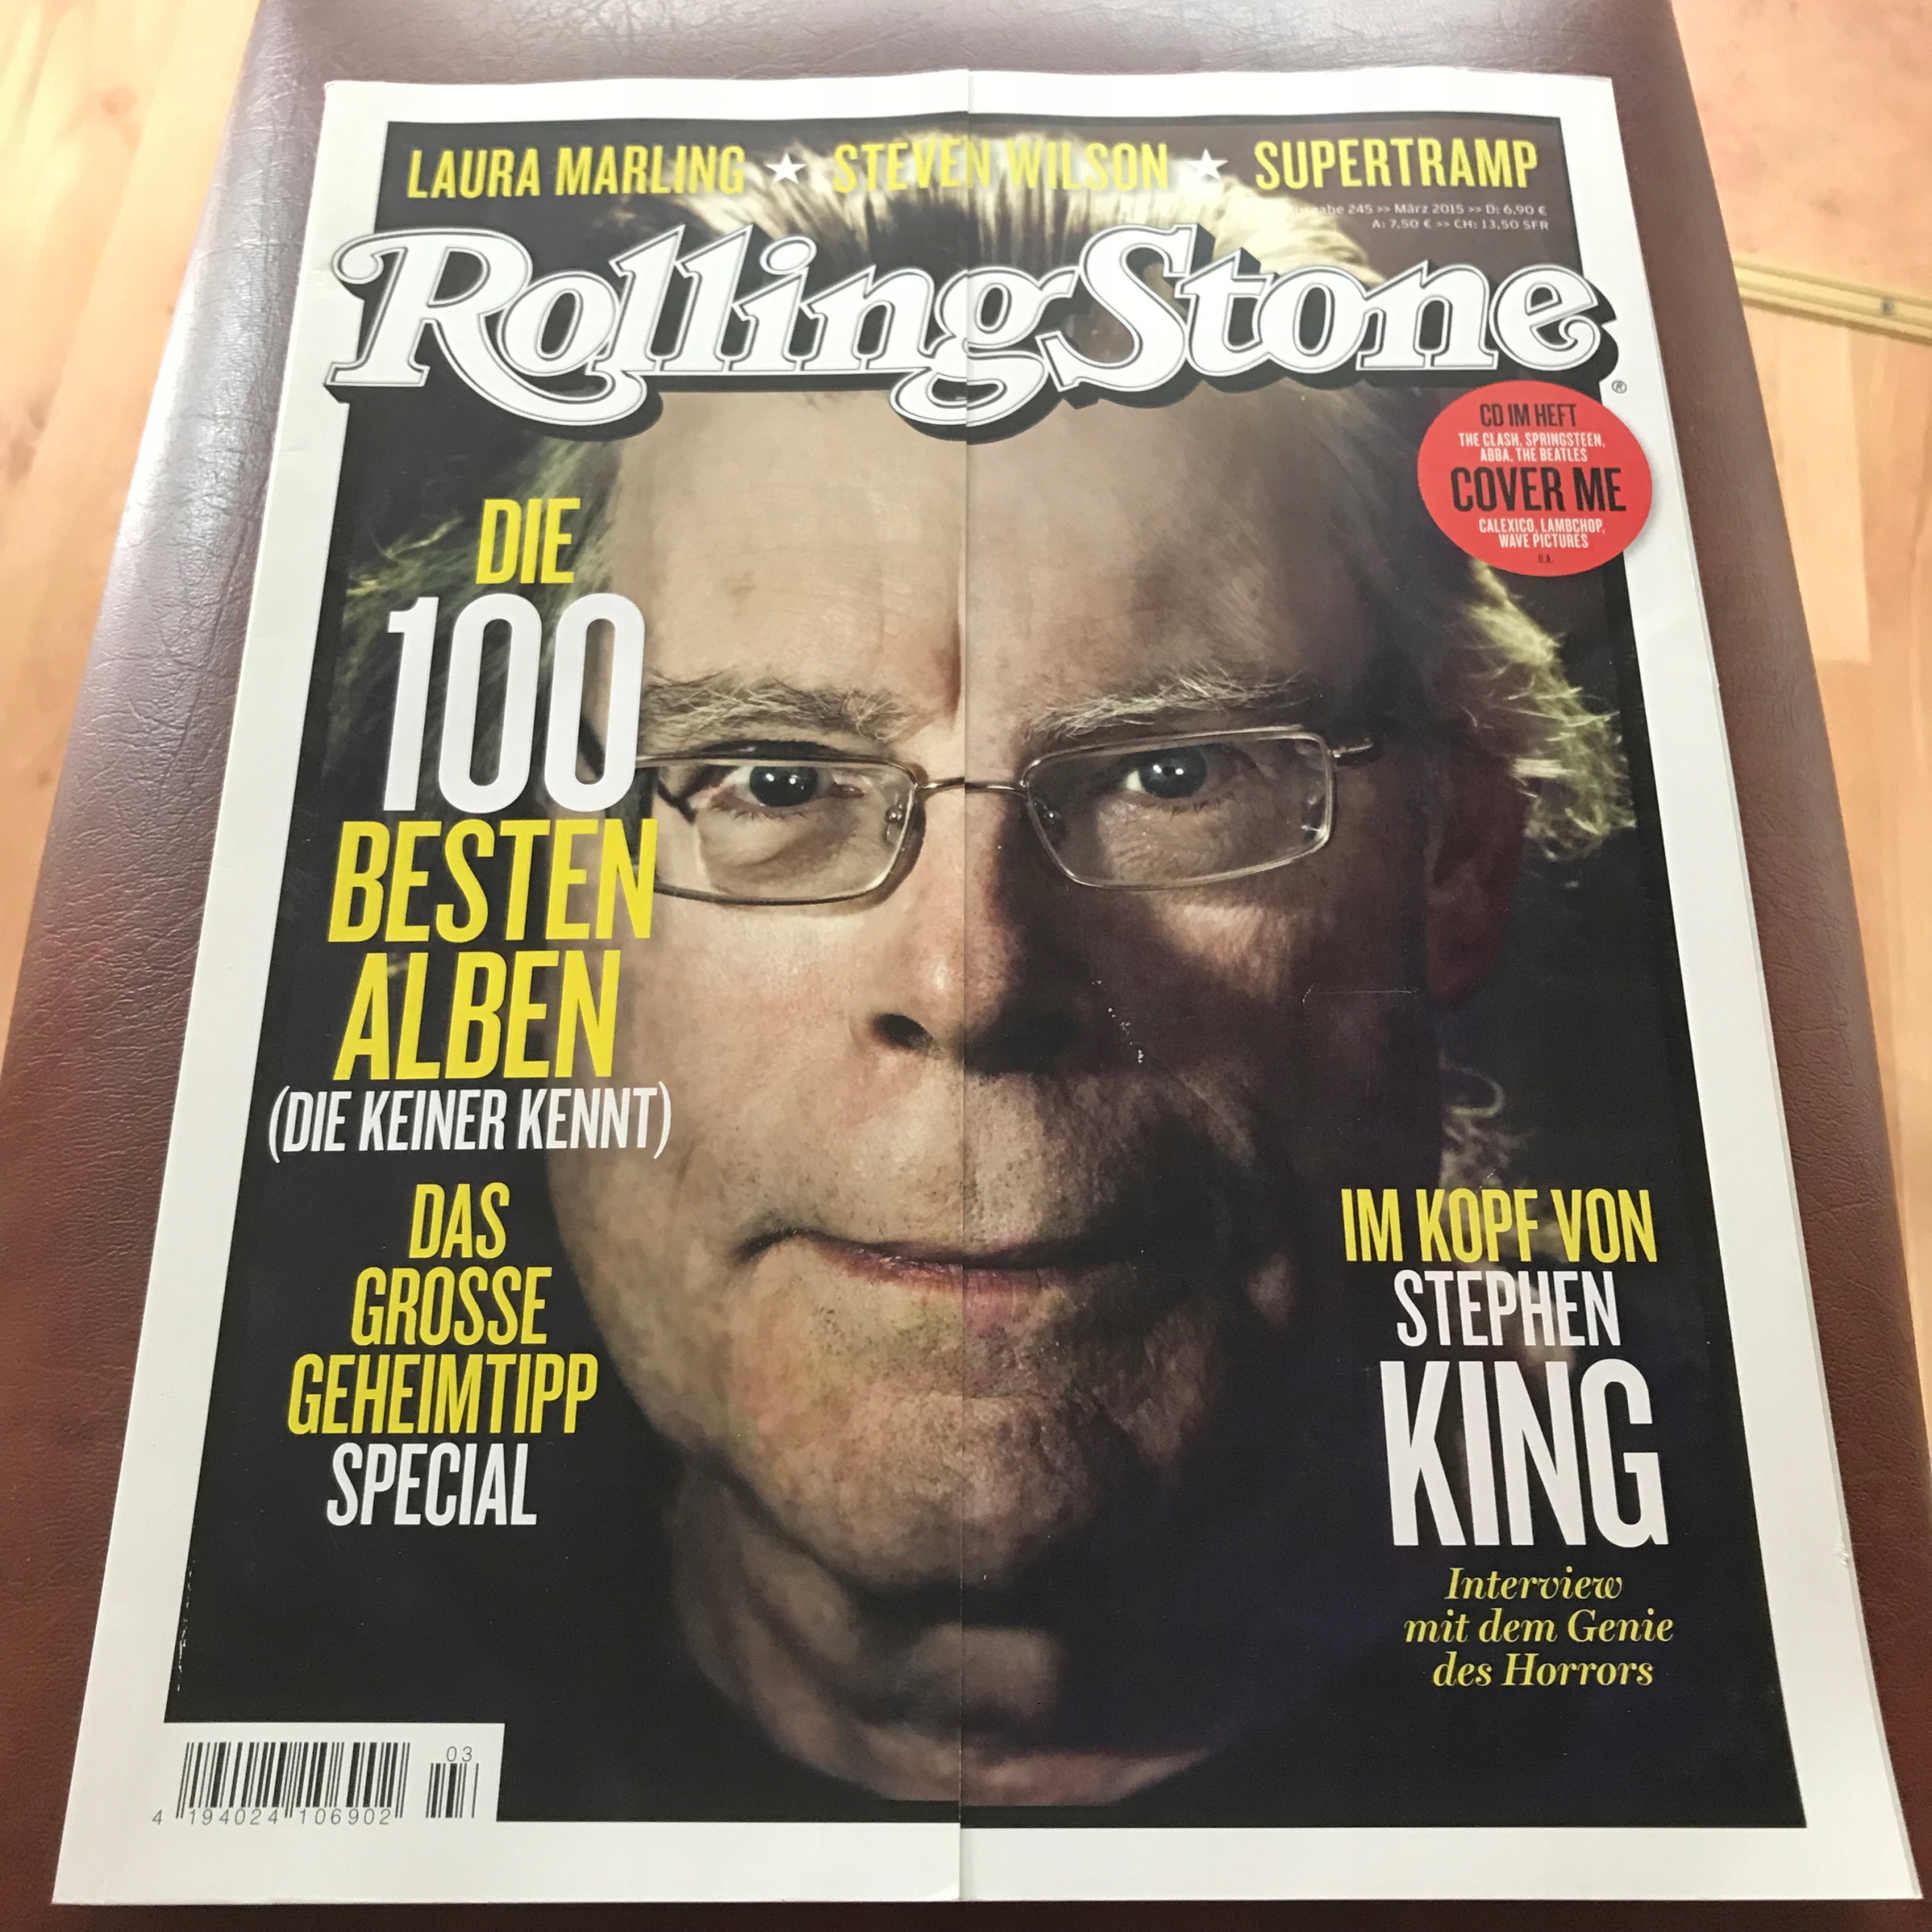 Stephen King: The Rolling Stone Interview